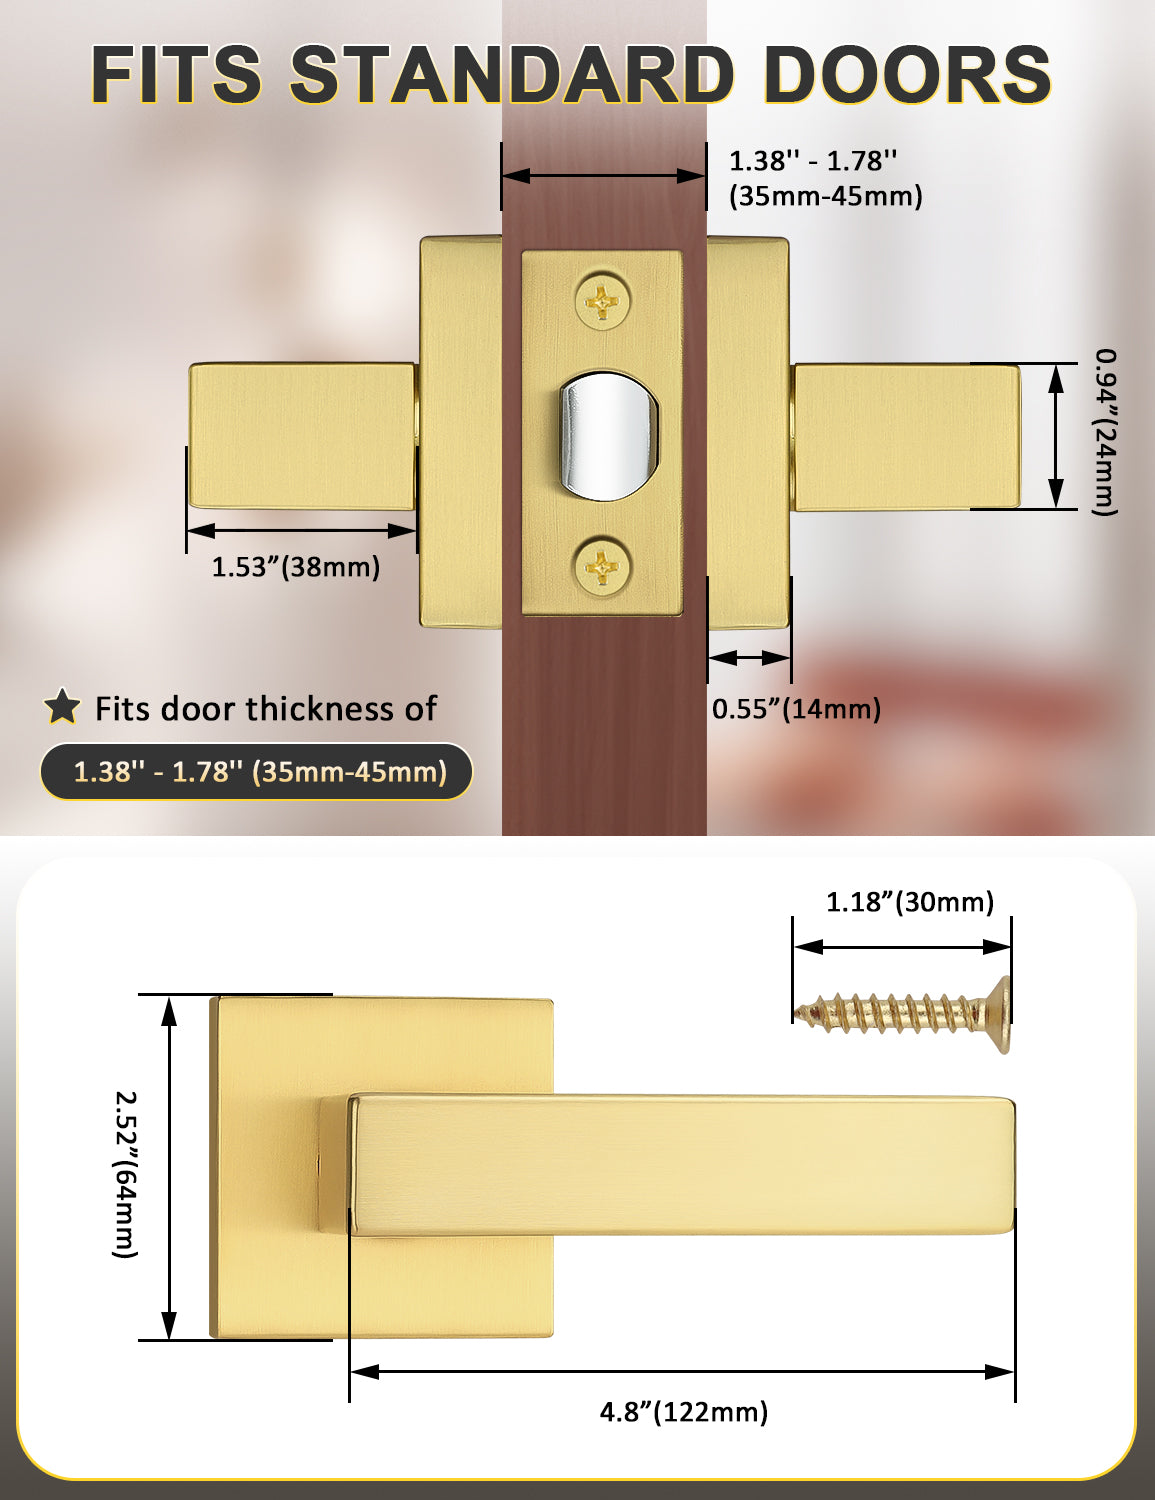 Tinewa 10 Pack Gold Keyless Square Levers Handles, Interior Passage Door Locksets for Hall Closet Door Knobs Lock Reversible Right & Left Handed